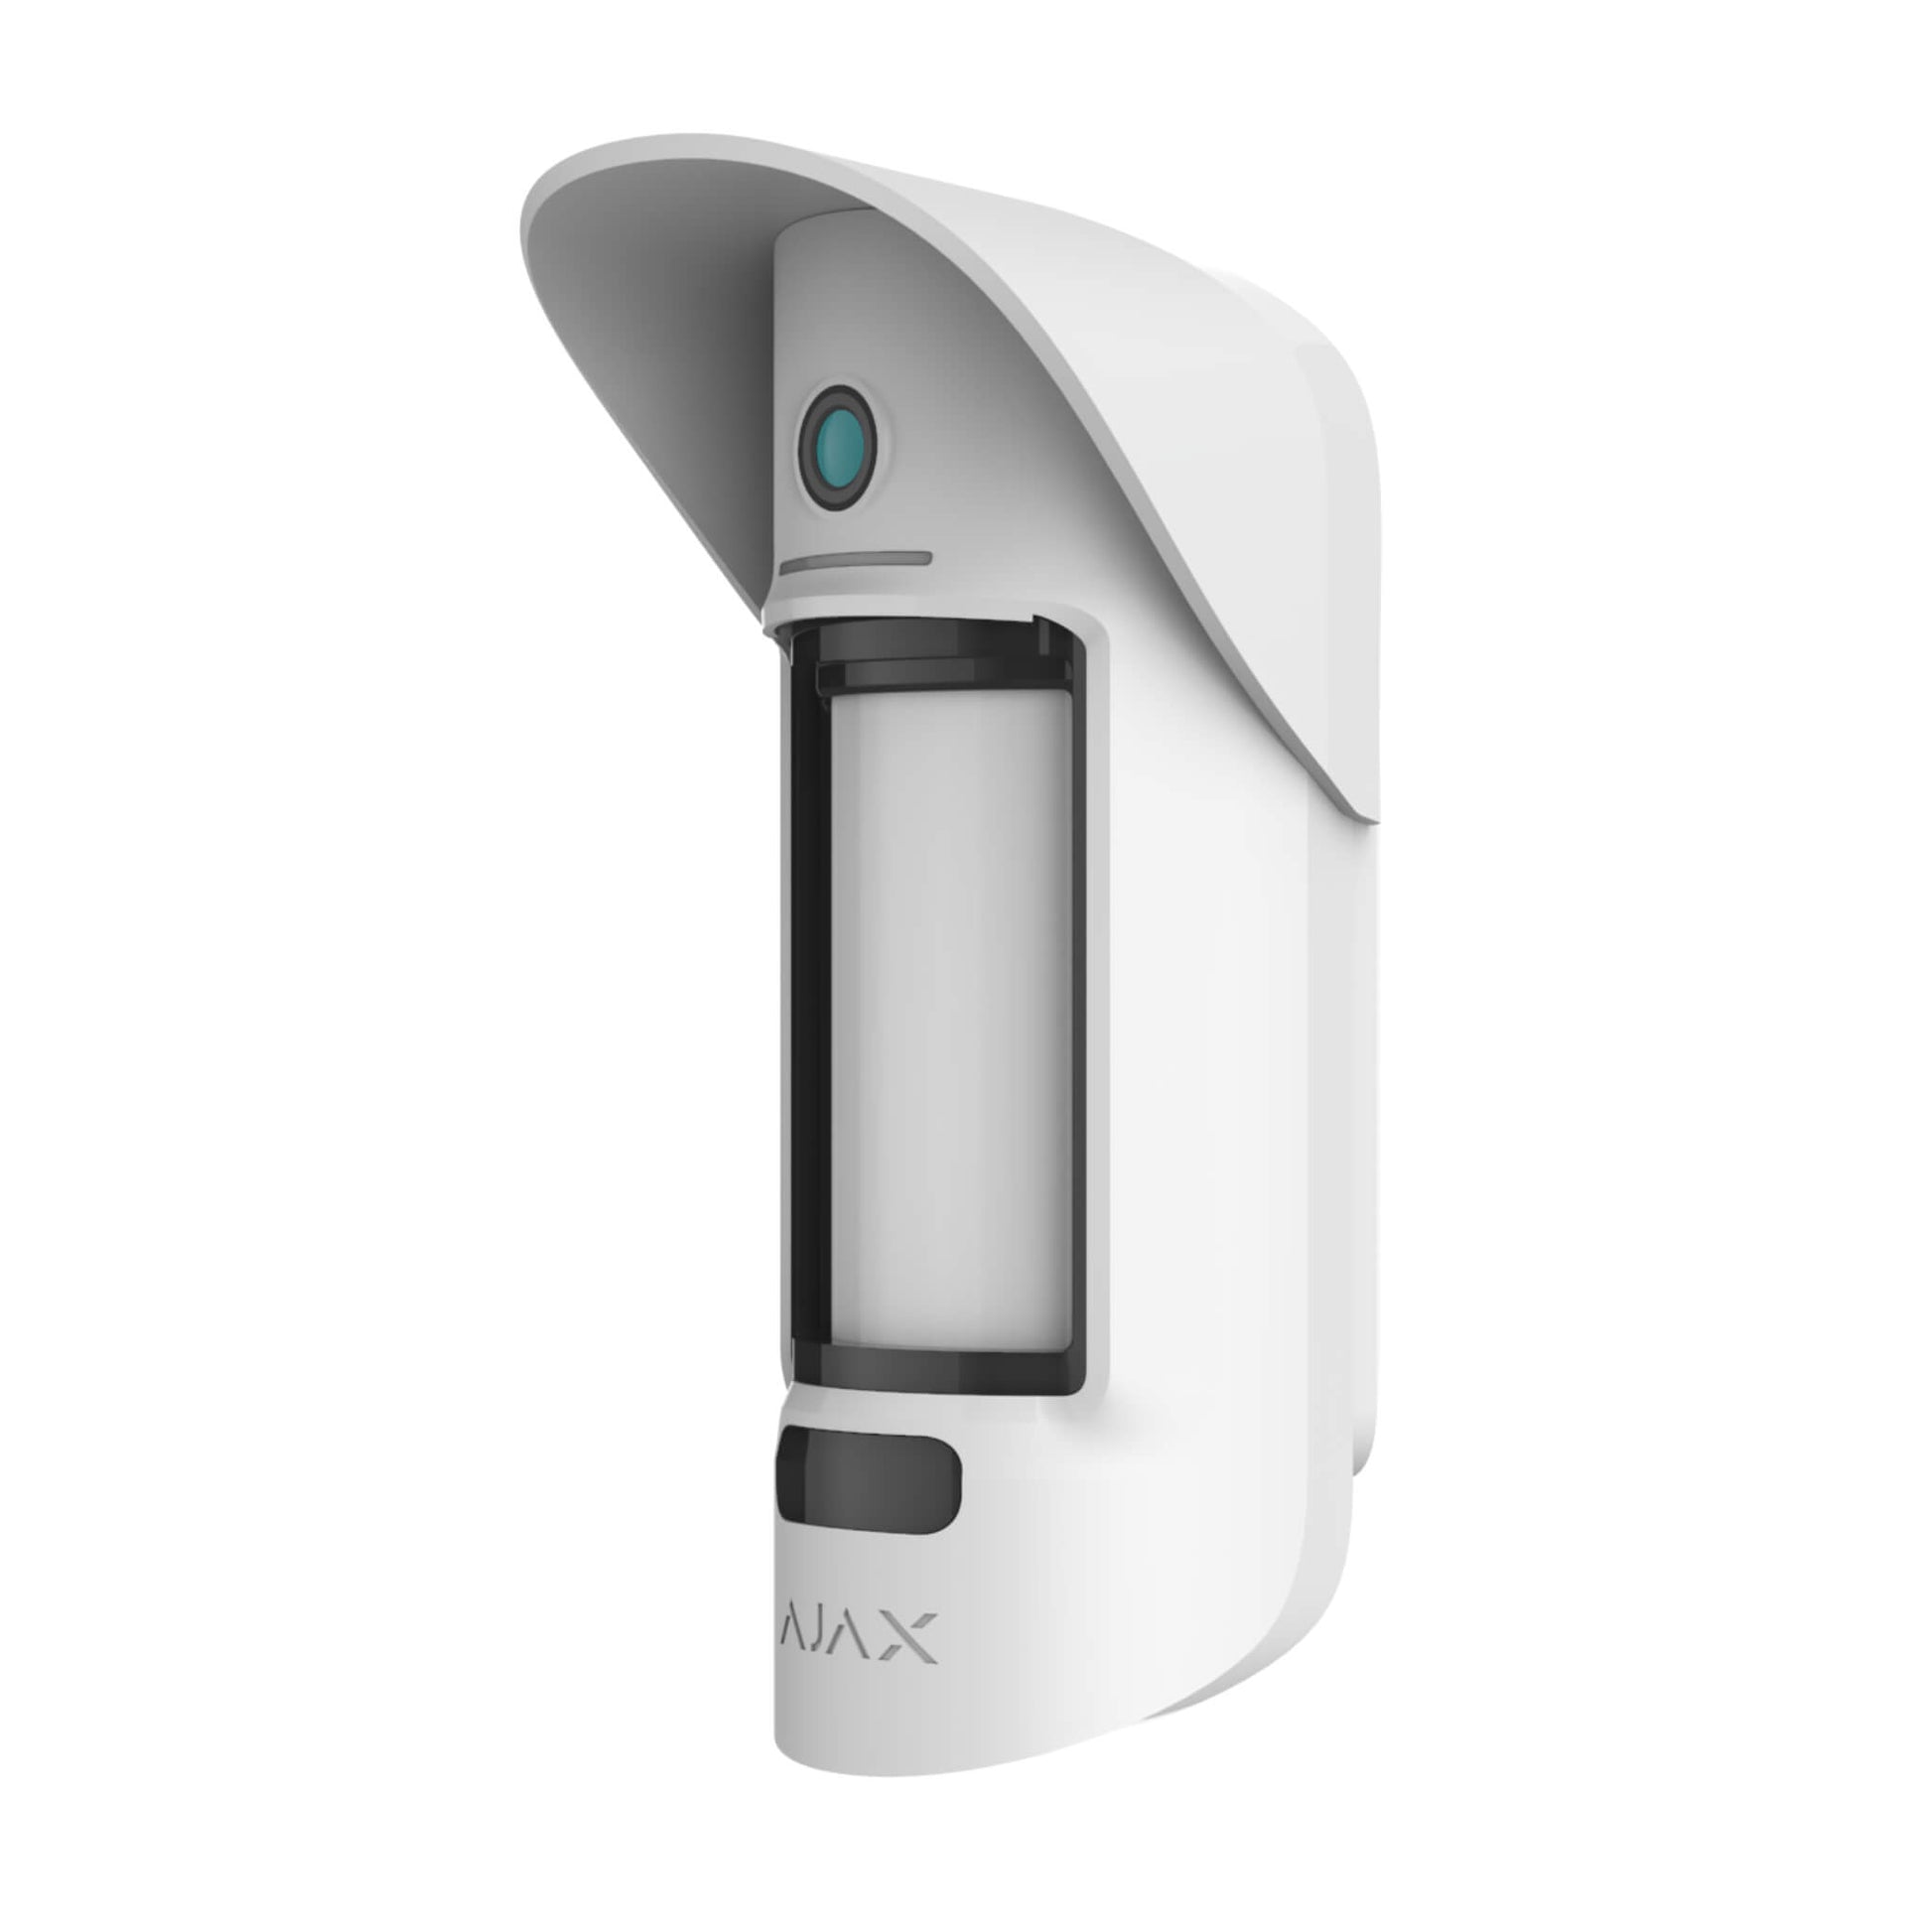 White Ajax MotionCam (PhoD) Outdoor - a wireless motion detector with camera for photo real verification of alarms , for home and business security. the device ships in a size of 206 × 108 × 93 mm. and weighs 470 grams. Device is rated IP65 and is for outdoor use only, turned right view of device is displayed. Buy Ajax Online 